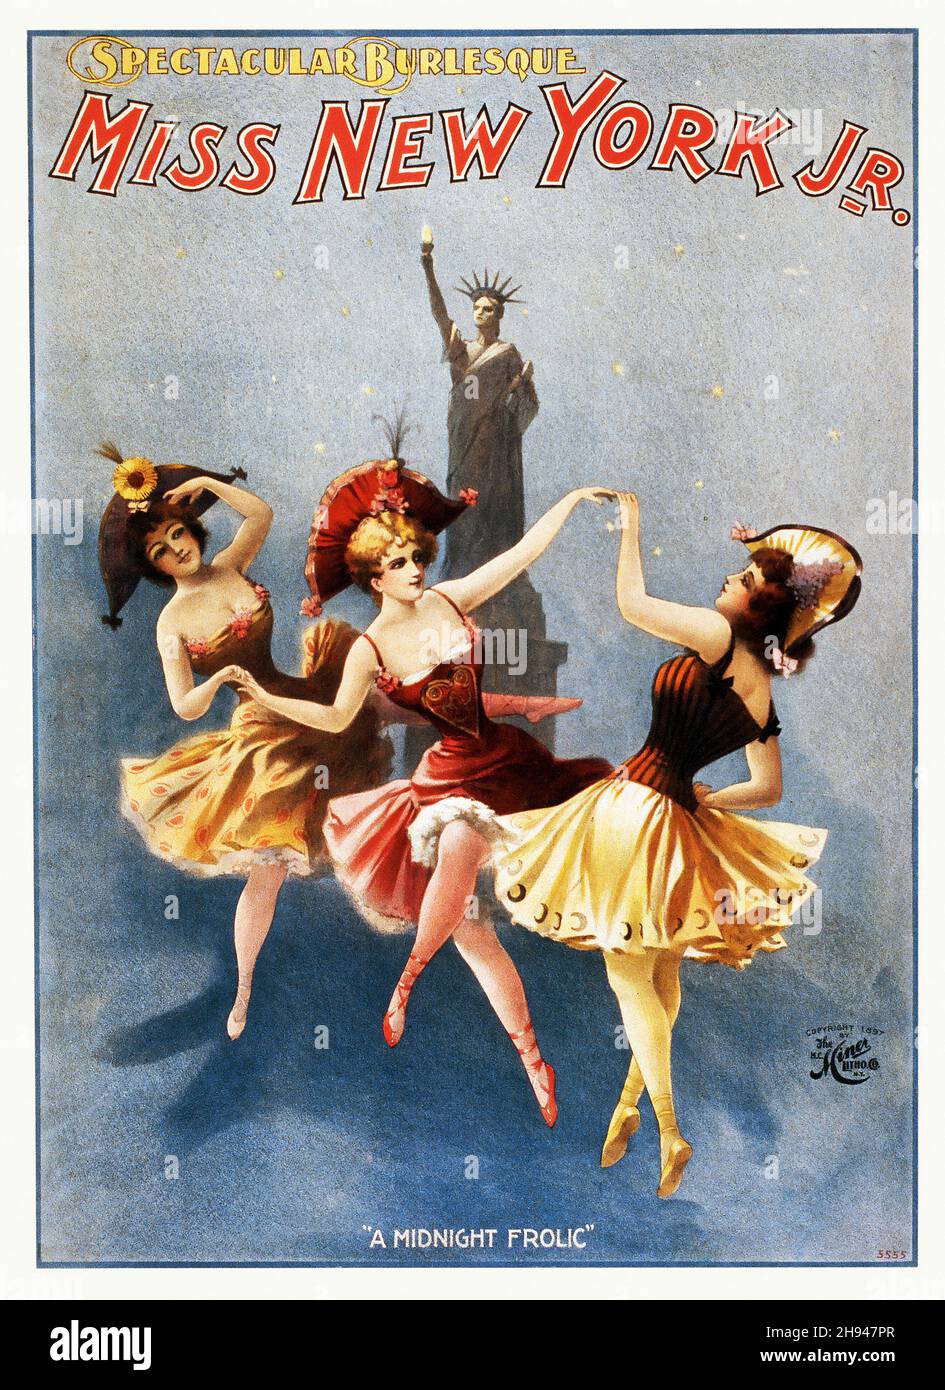 Spectacular Burlesque Miss New York, feat 3 ladies dancing in front of The Statue of Liberty. 'A Midnight Frolic' c 1897. H.C. Miner Litho. Co. Stock Photo